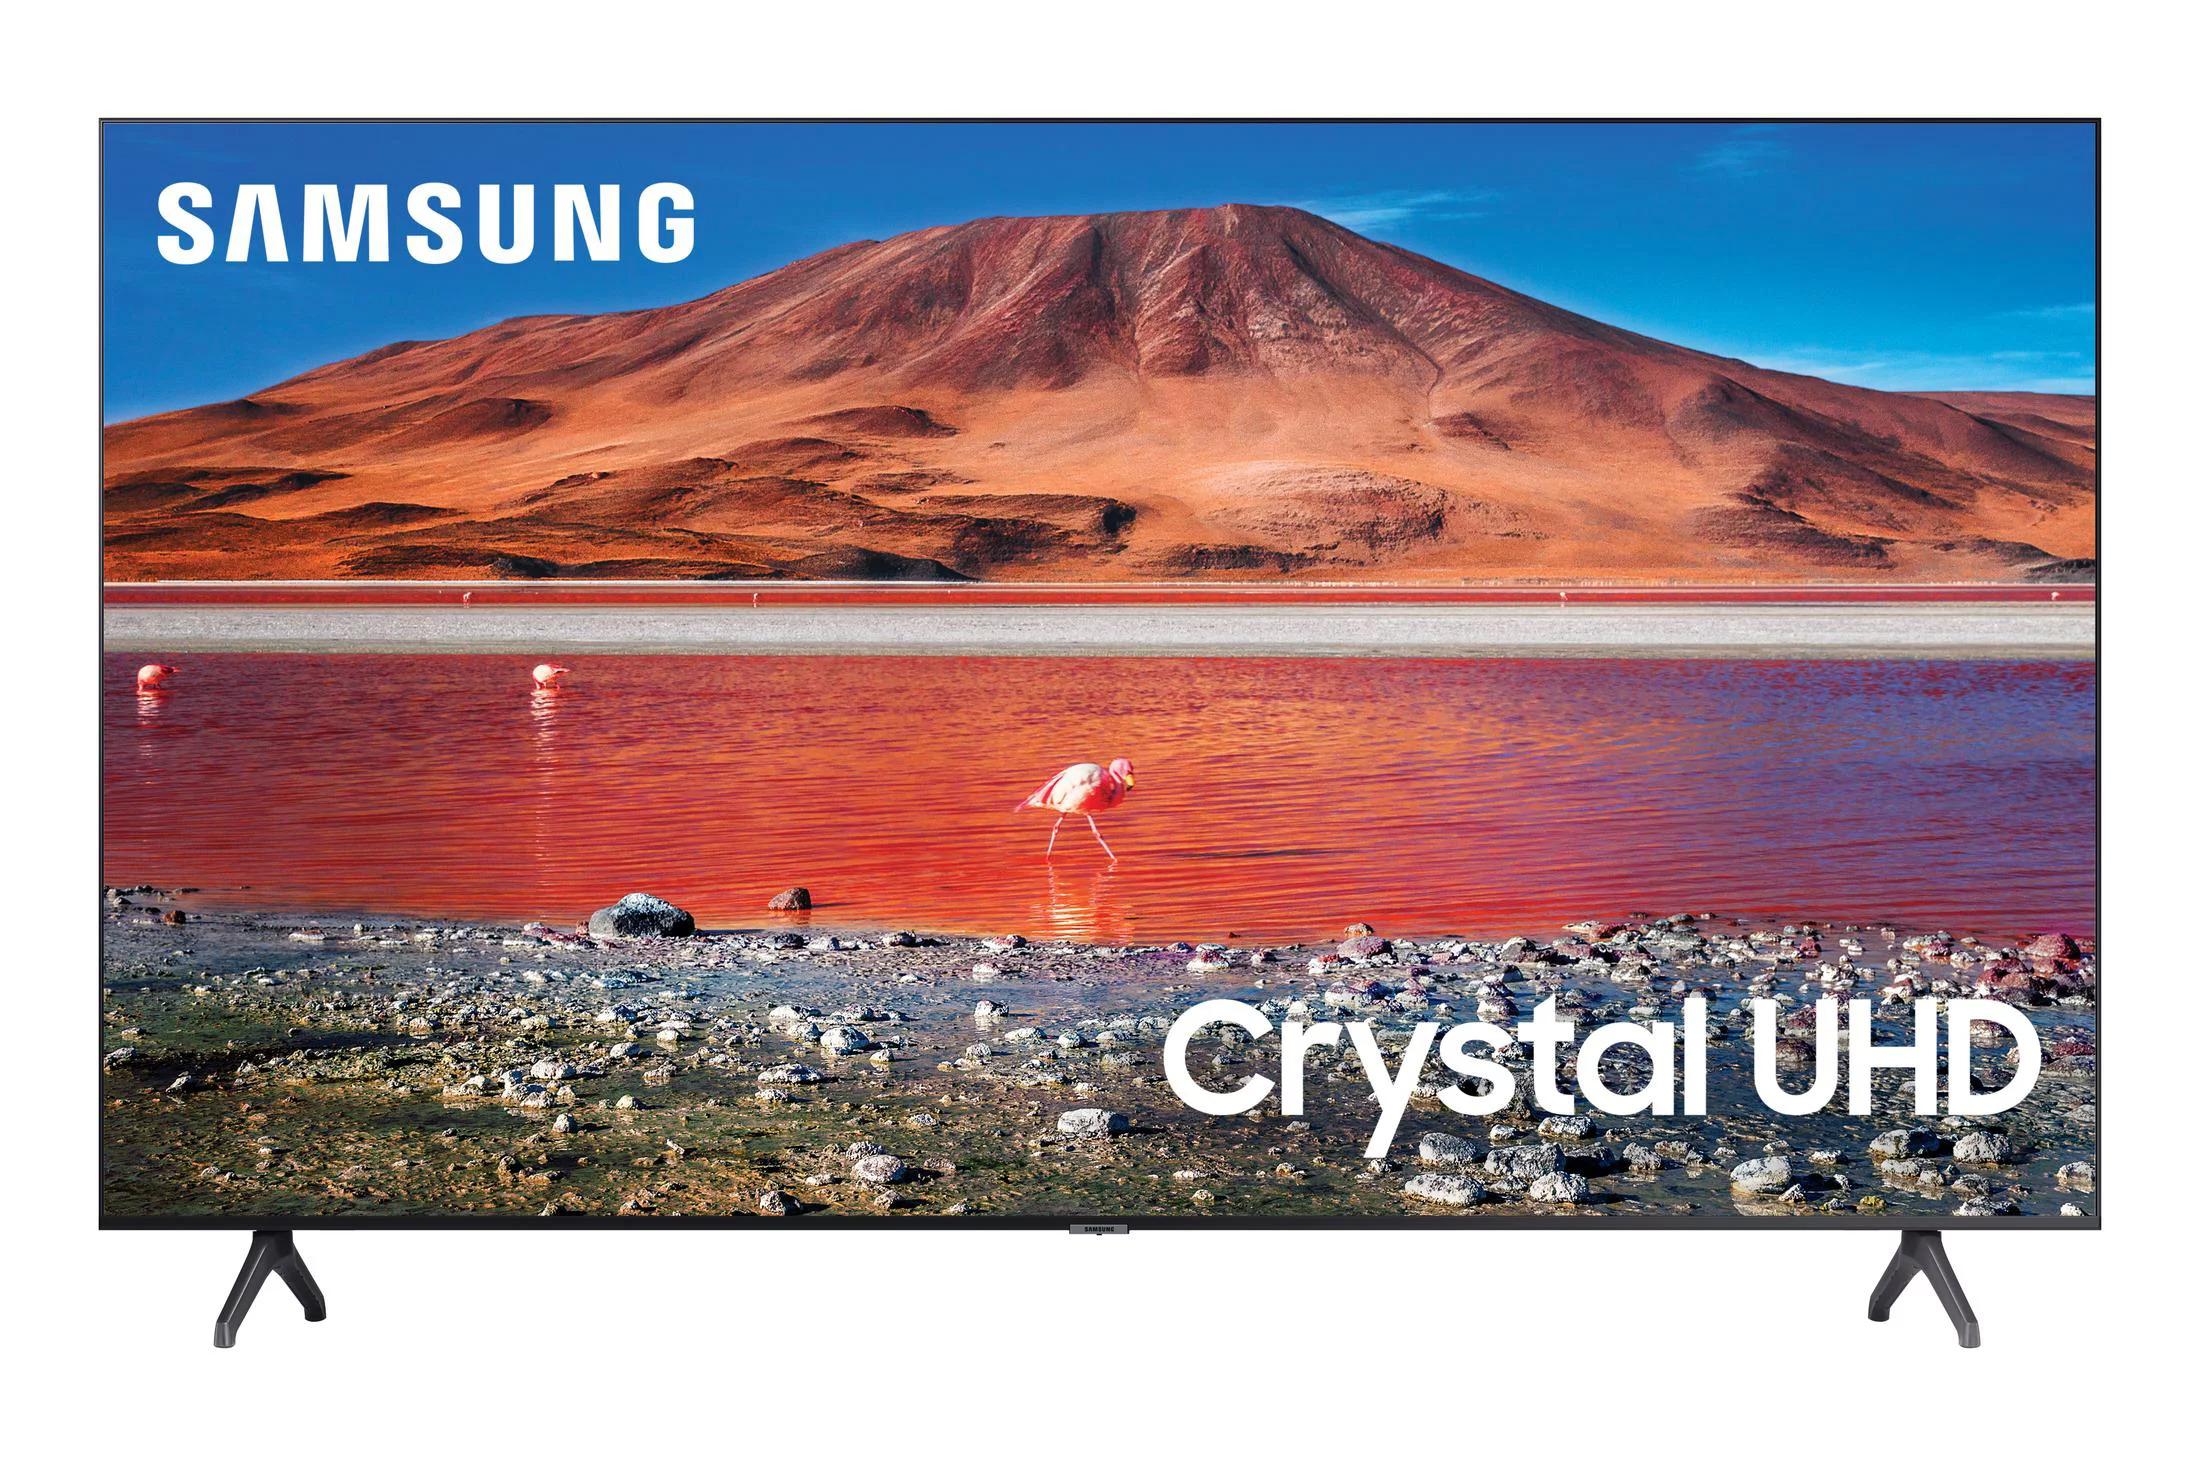 50in Samsung Class TU7000B 4K Crystal UHD HDR Smart TV for $219 Shipped